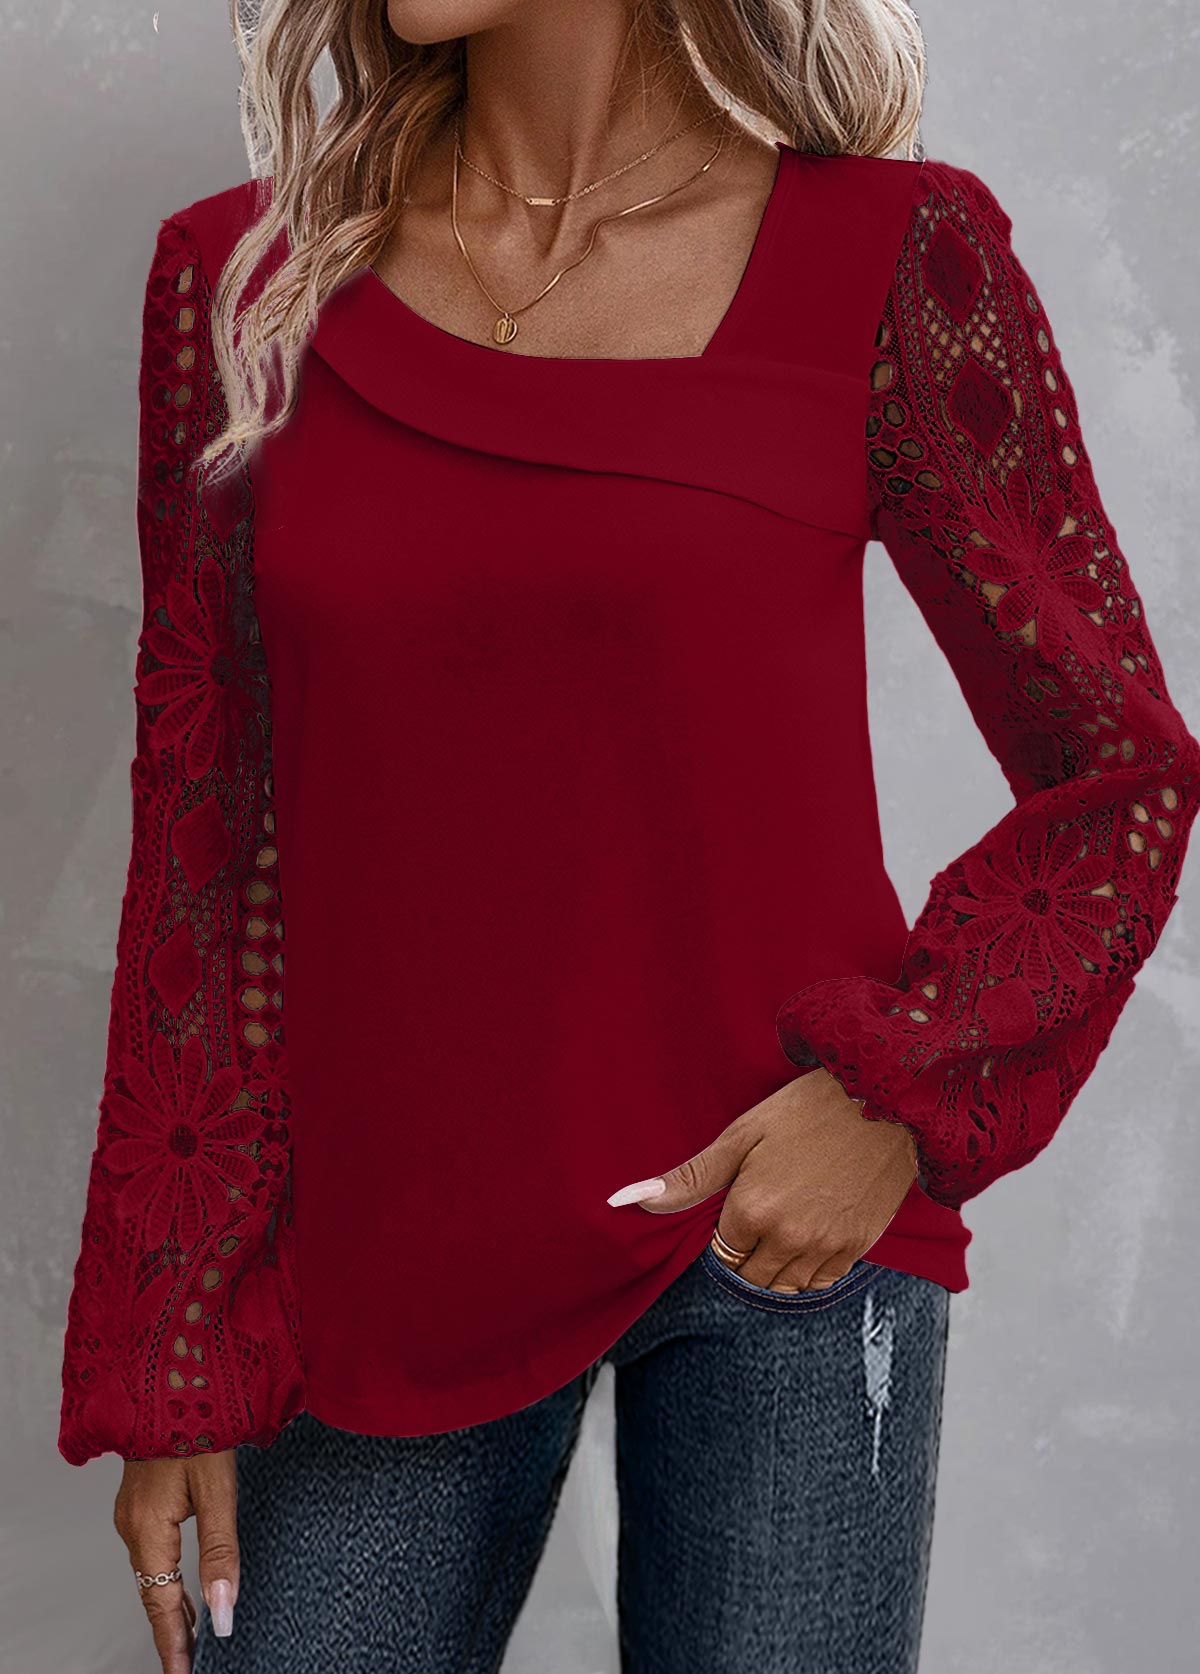 ROTITA Lace Wine Red Asymmetrical Neck Long Sleeve Blouse